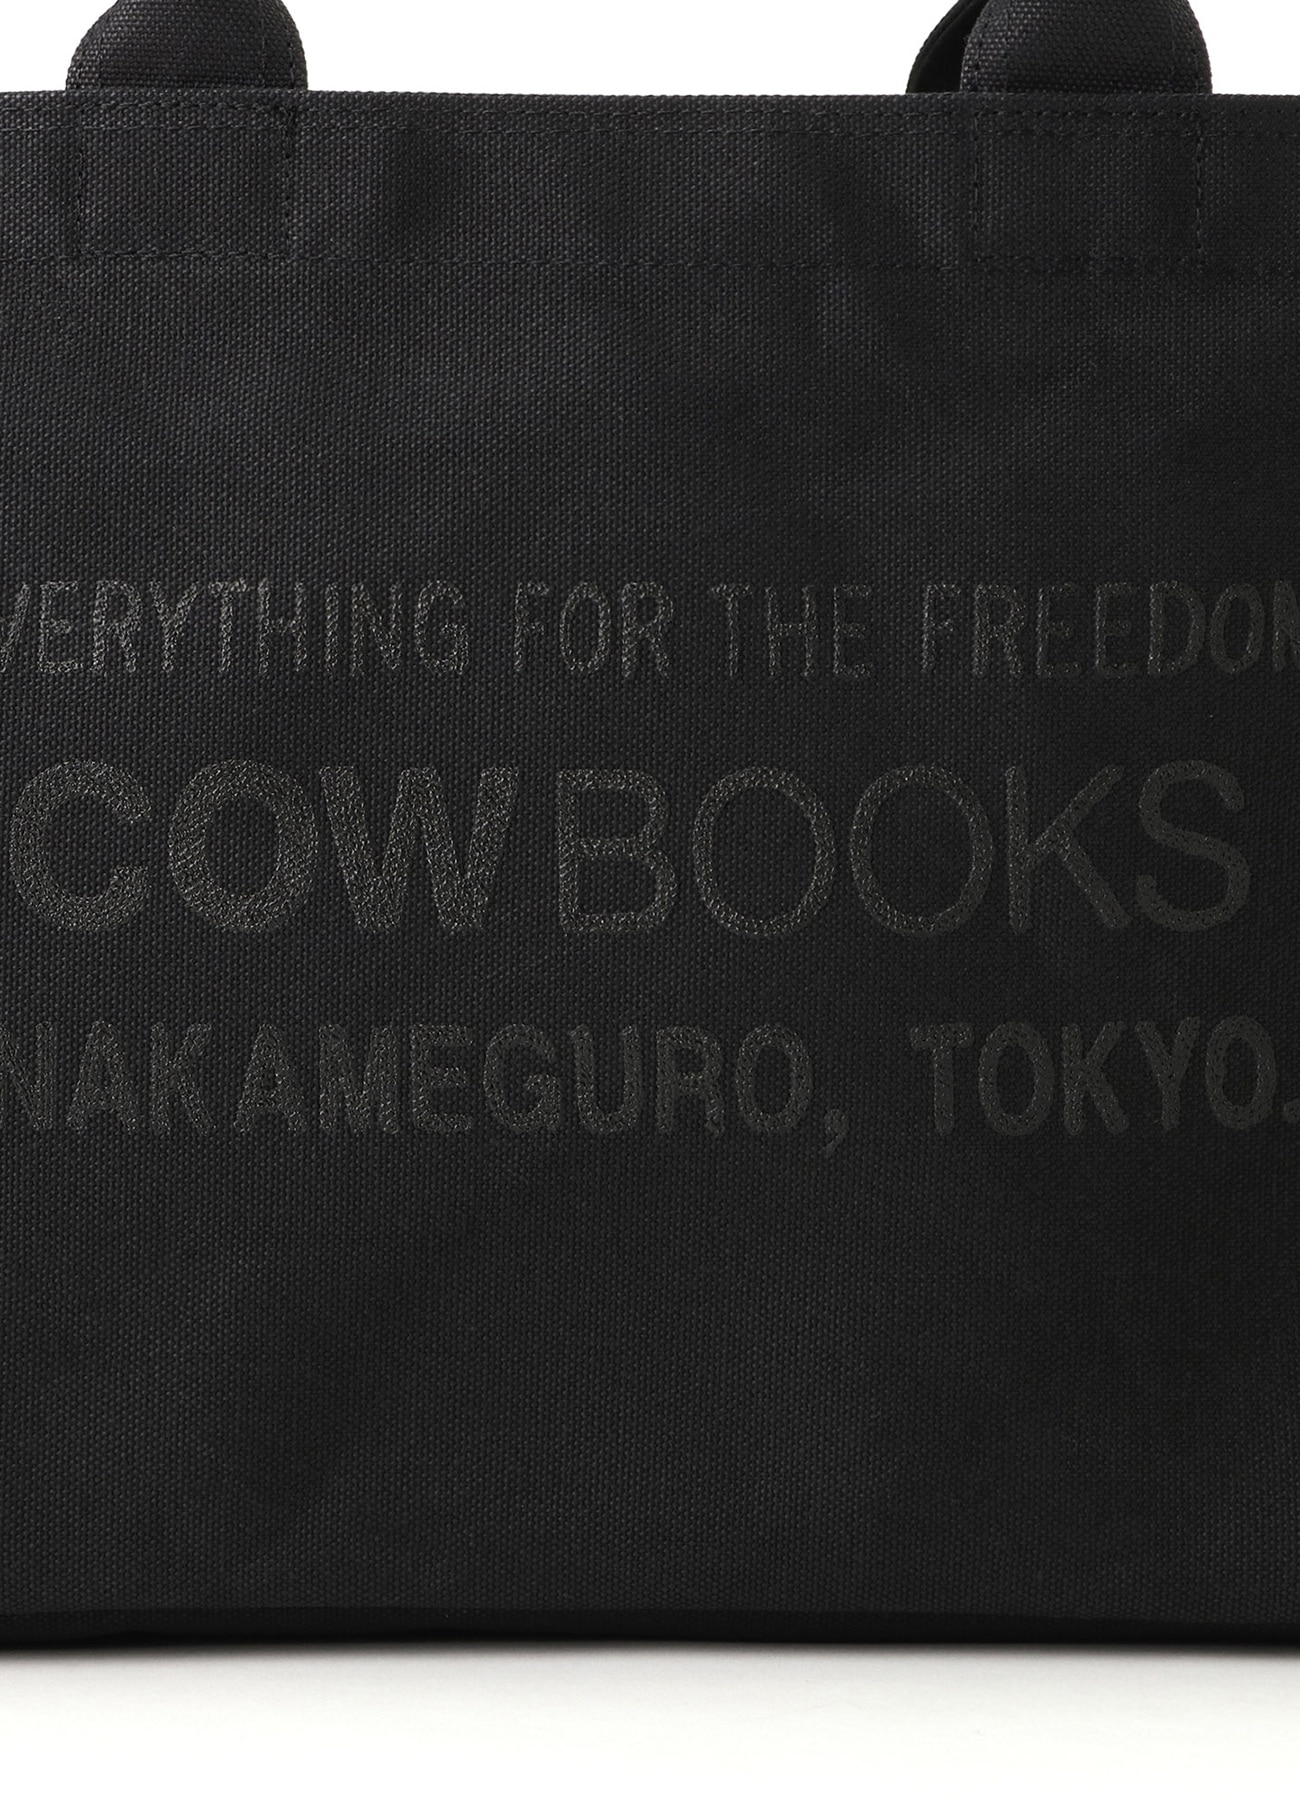 WILDSIDE × COW BOOKS Container Tote Small(FREE SIZE BLACK): COW